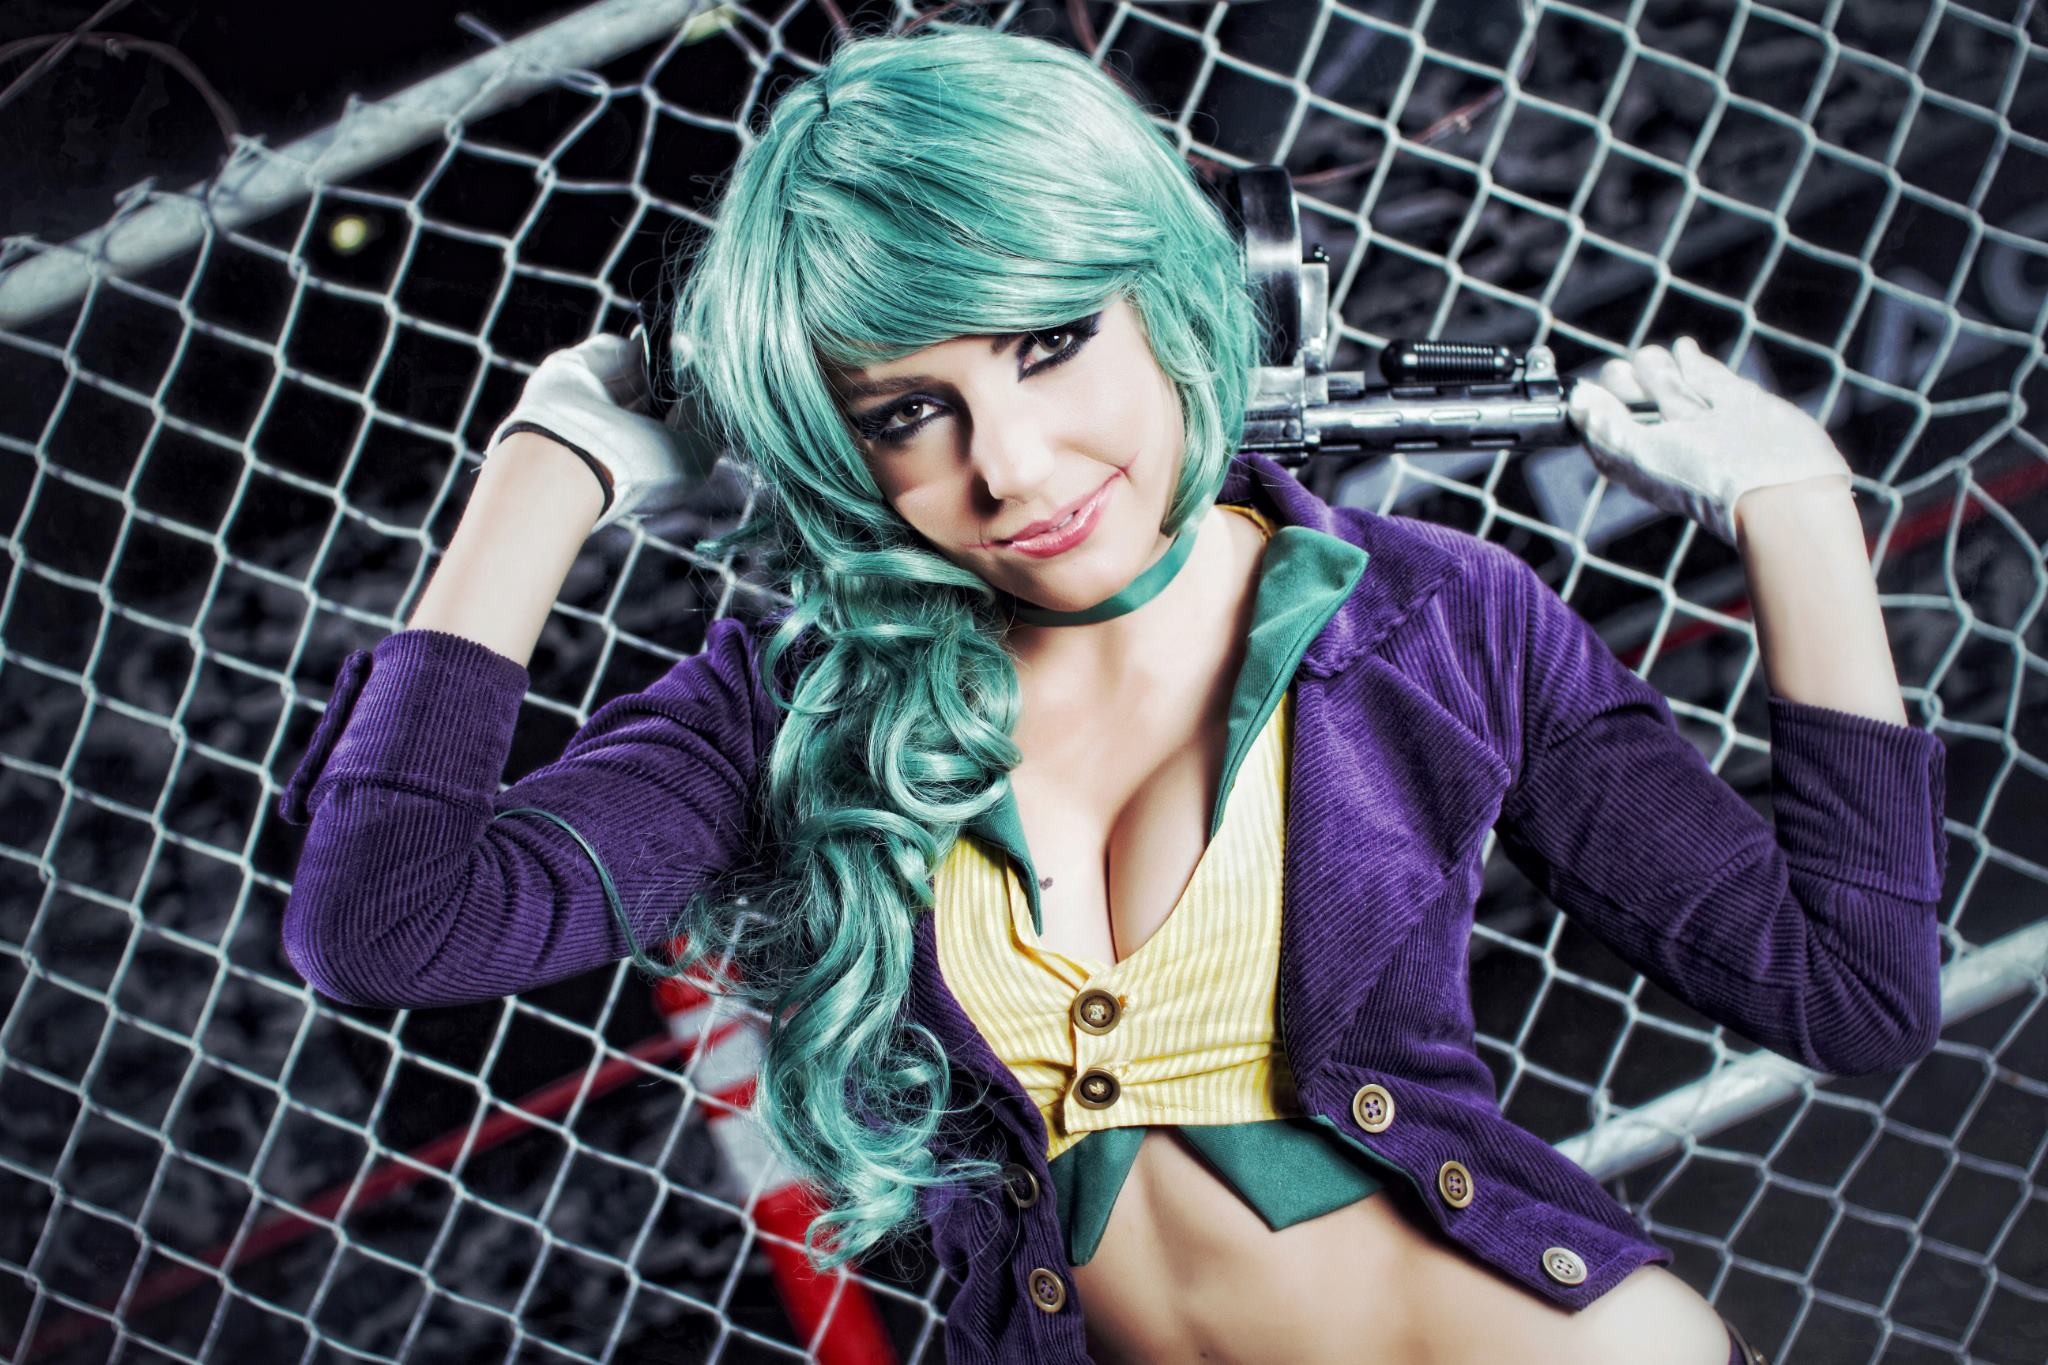 2048x1365 Jessica Nigri images Lady Joker HD wallpaper and background photos